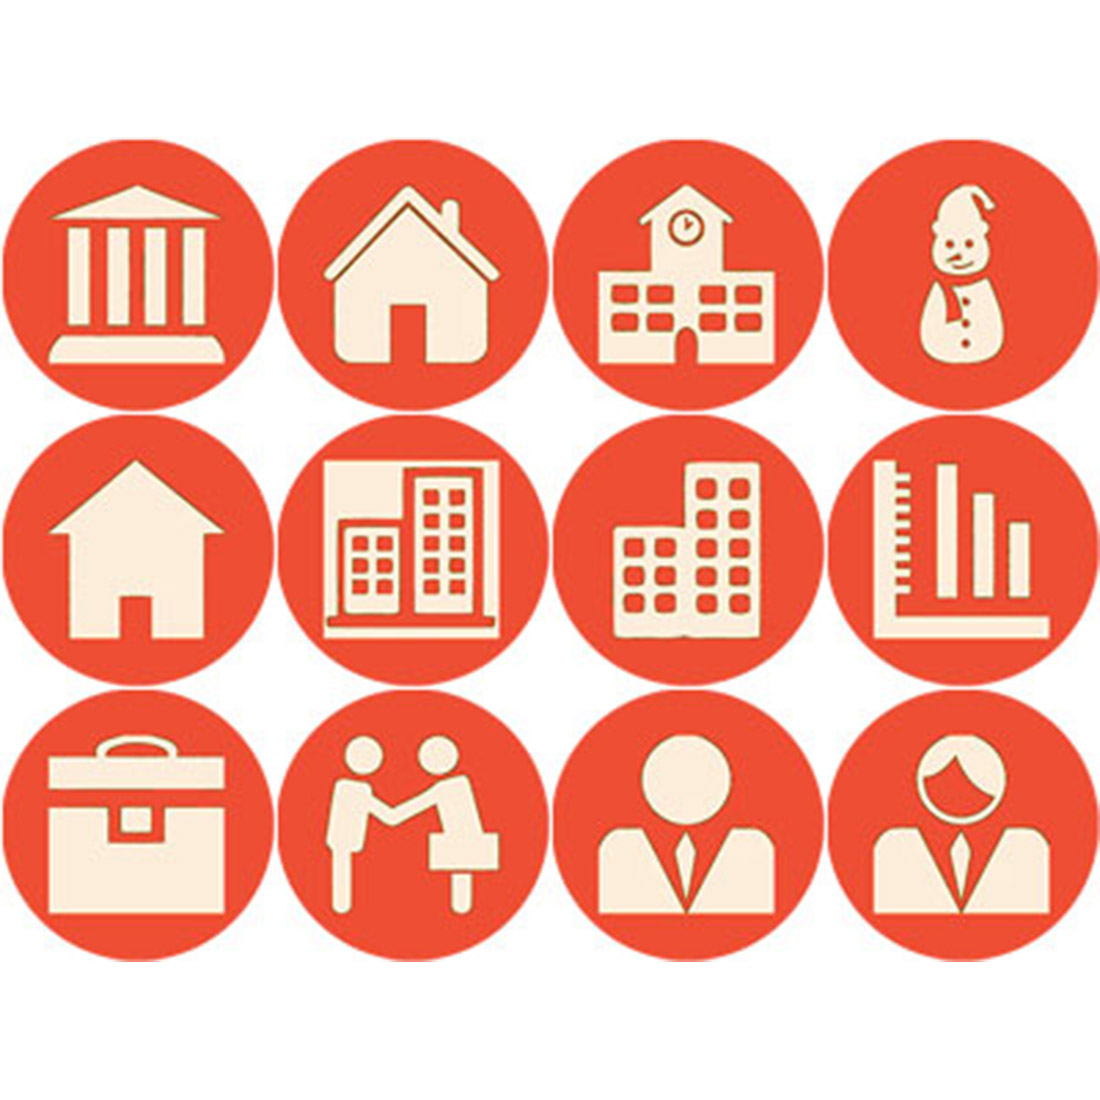 PEACH AND BURNT ORANGE BUILDING ROUND ICONS cover image.